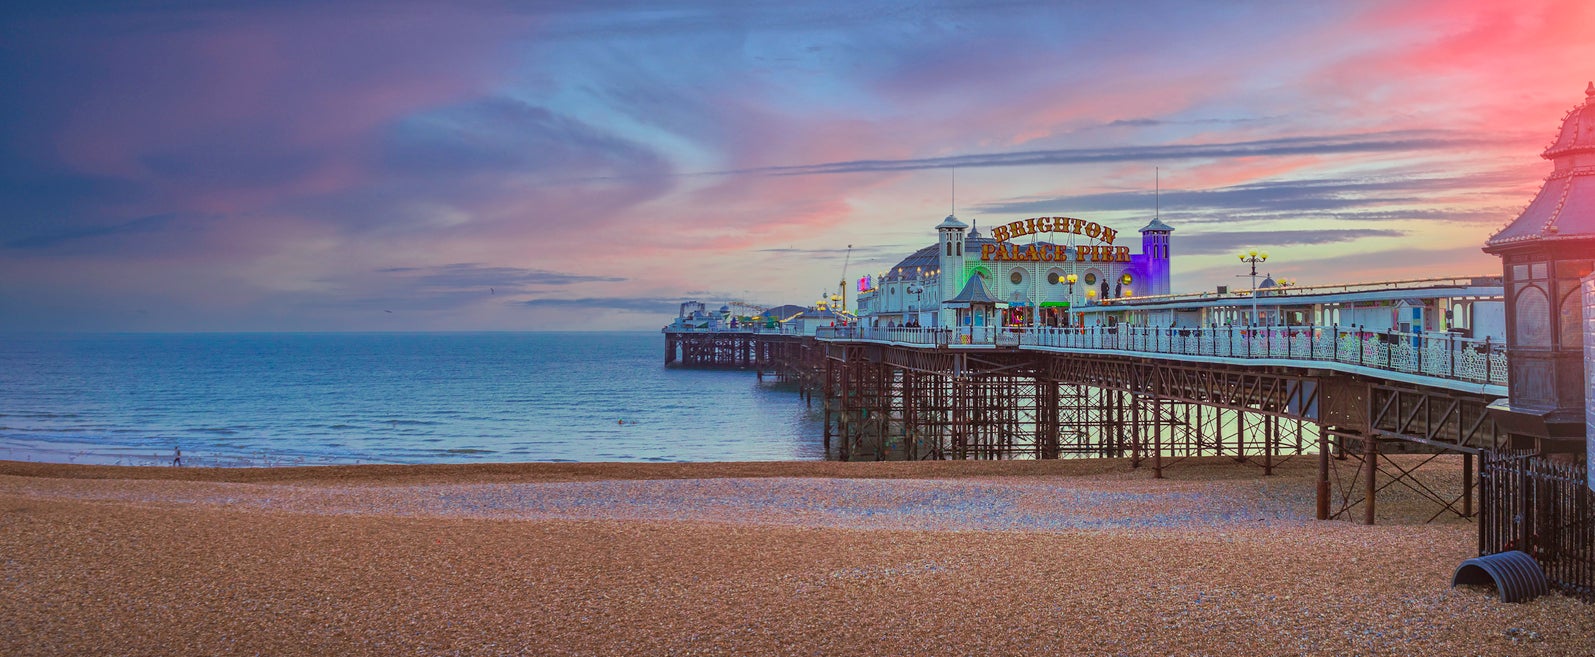 The Palace Pier is one of Brighton’s most famous attractions